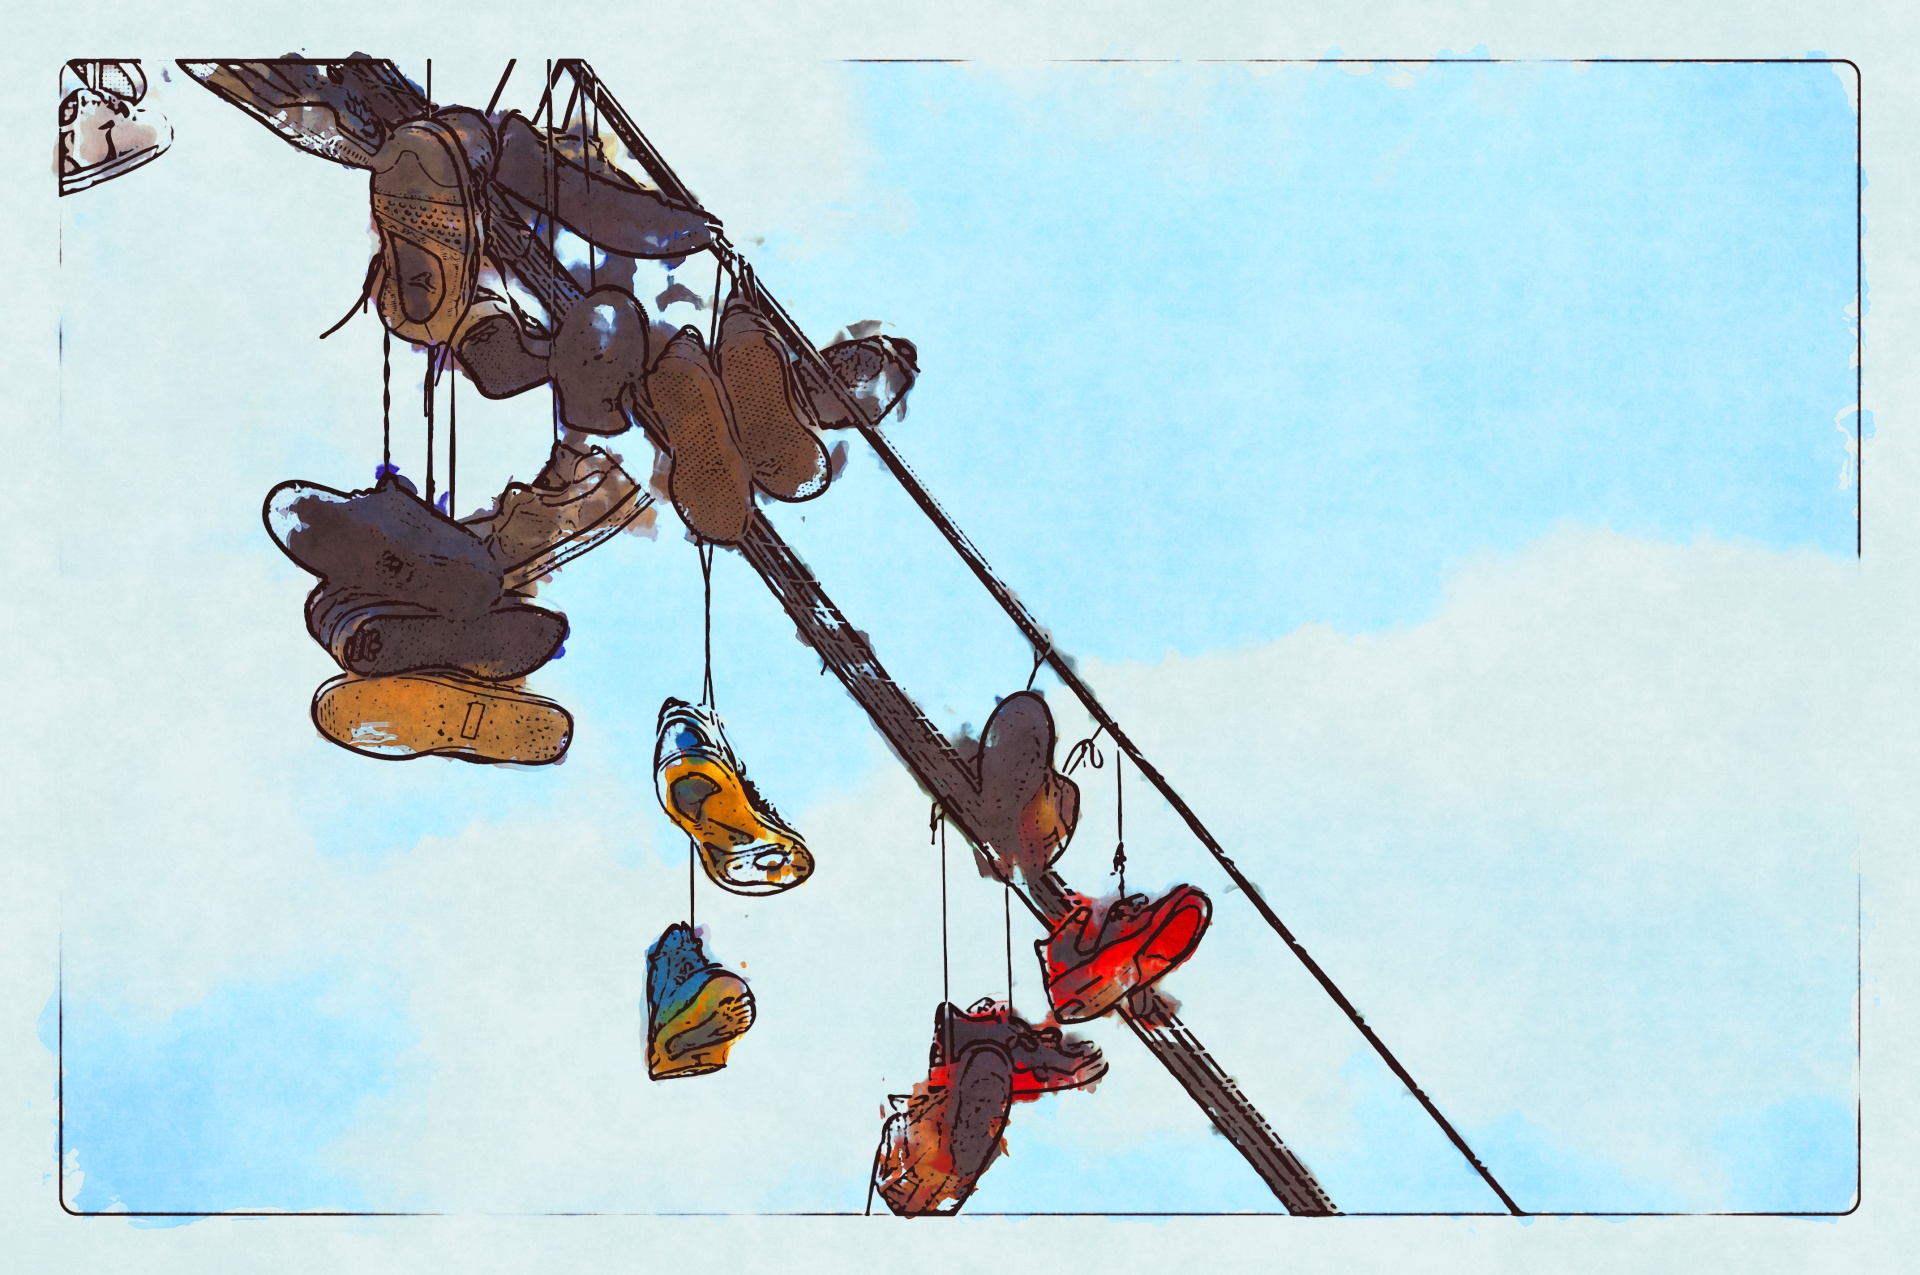 modern art line drawing filter on photograph of tennis shoes hanging on telephone wires